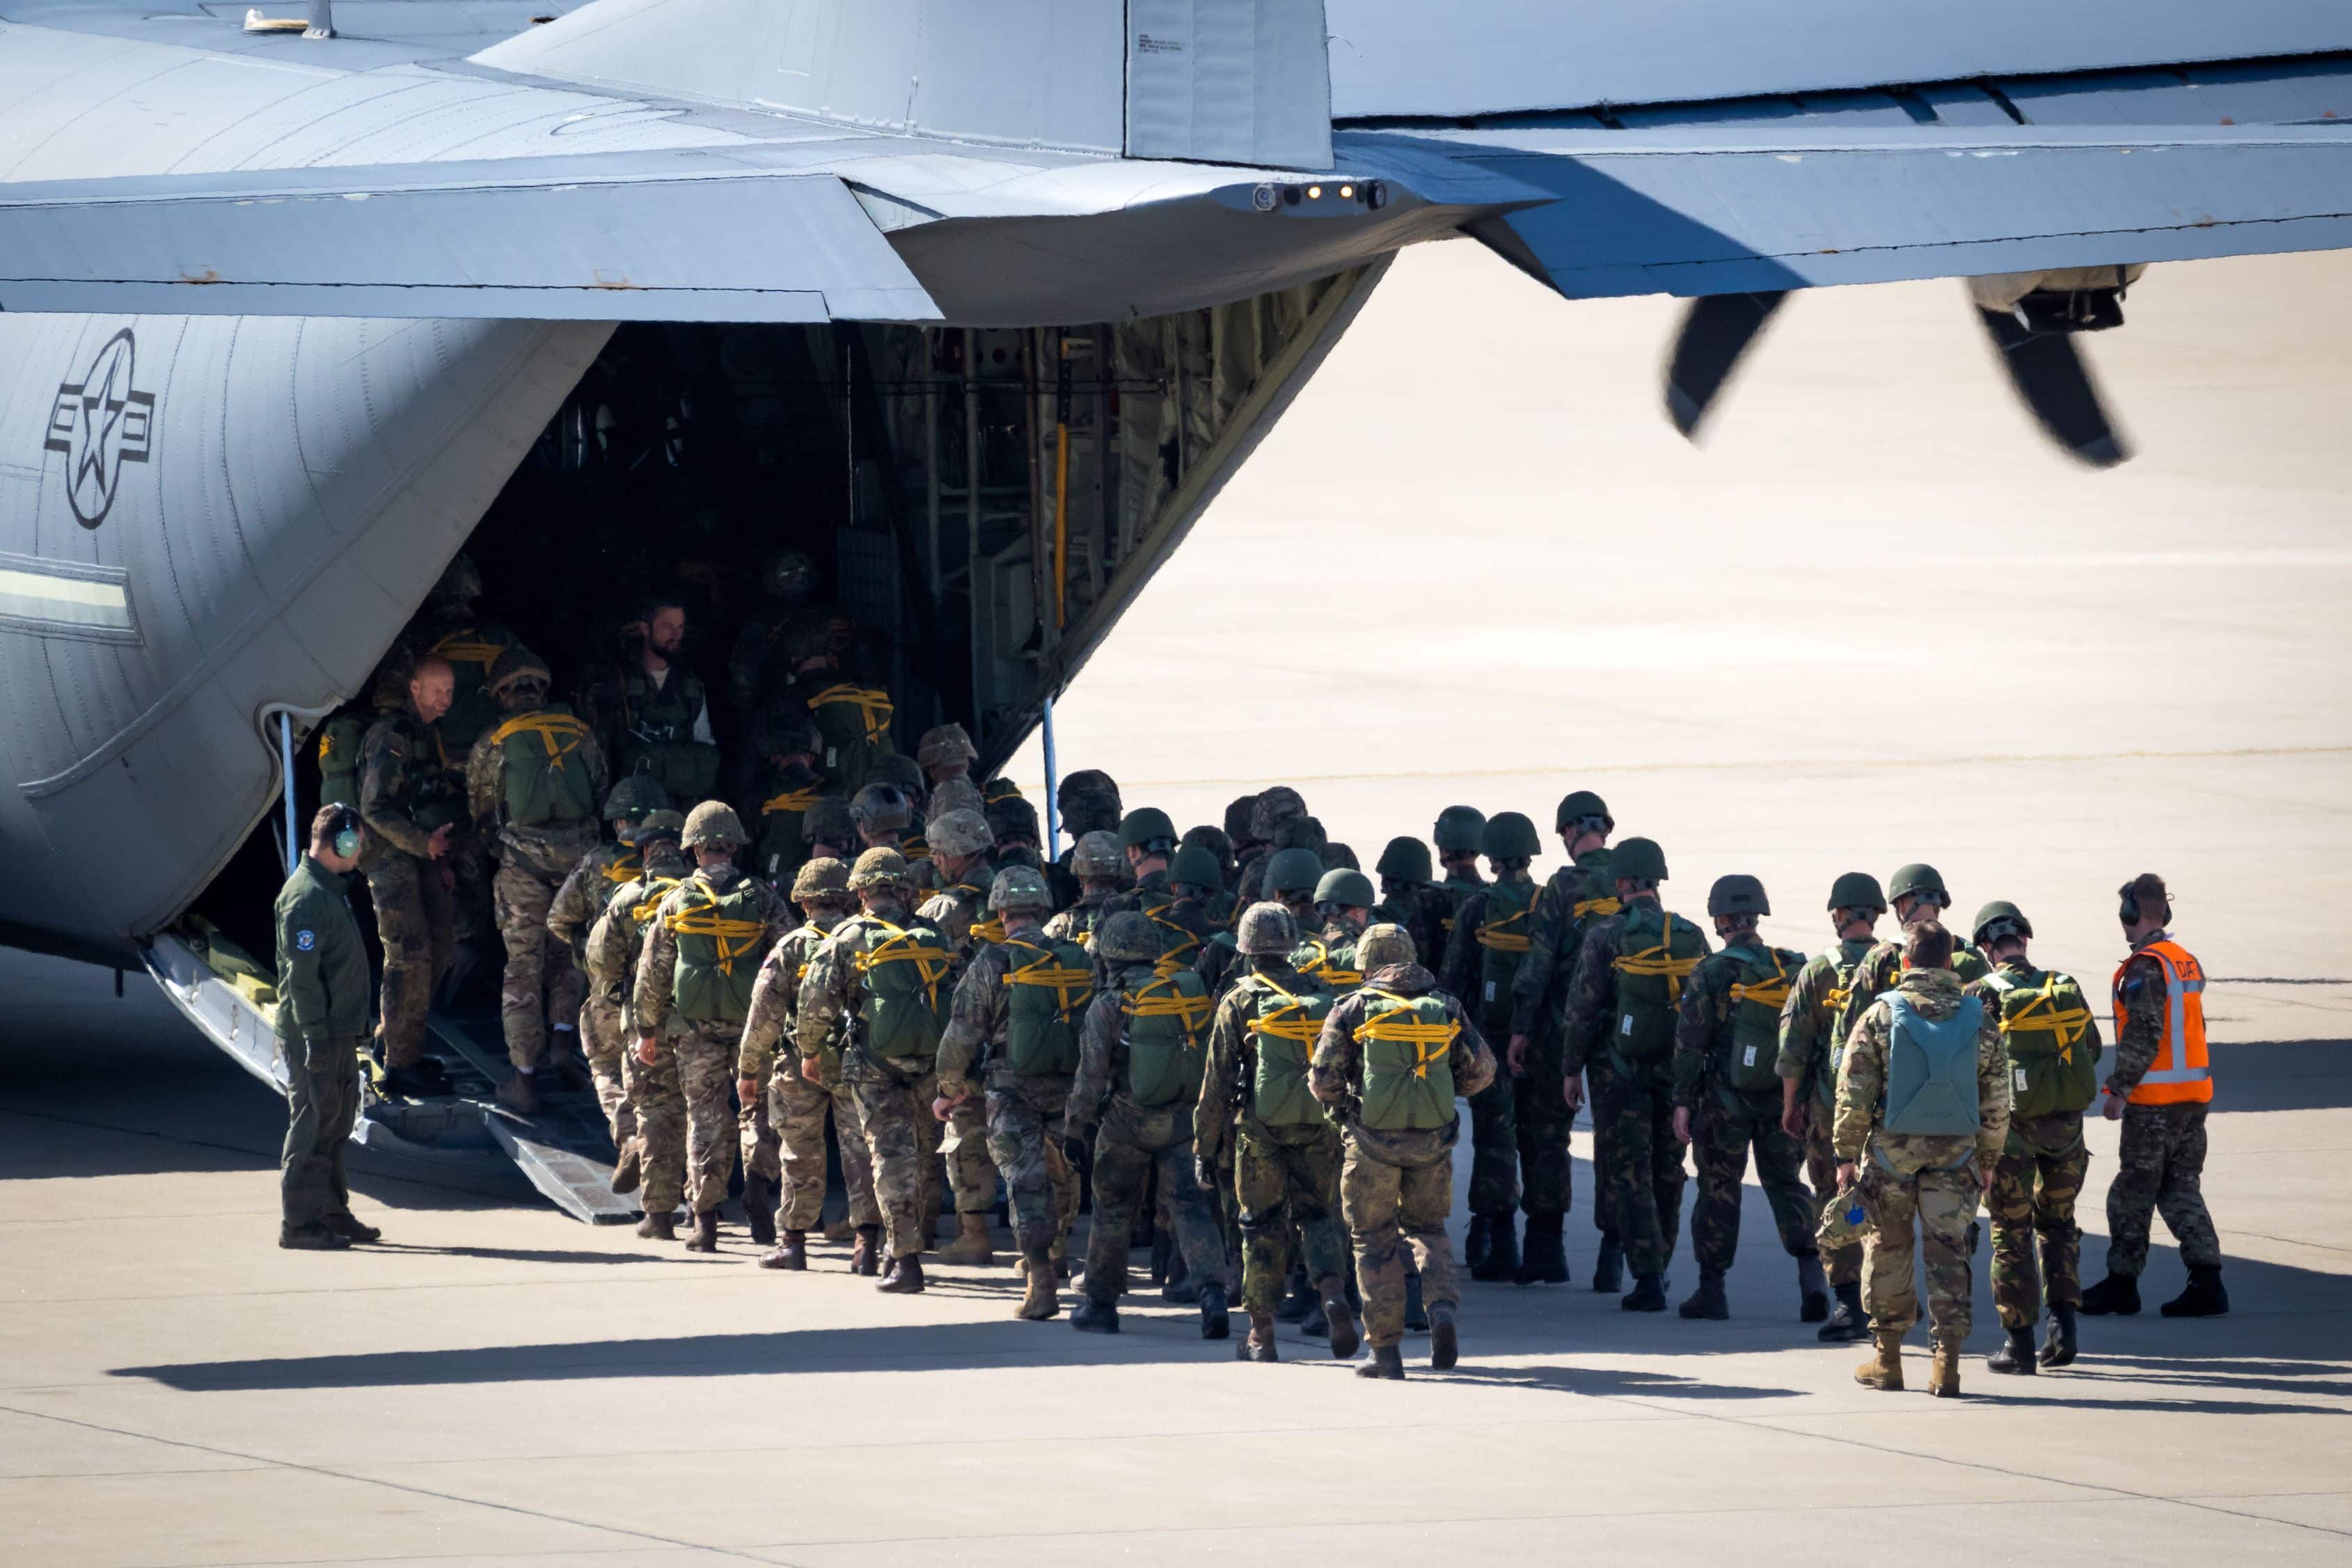 Paratroopers entering a US Air Force C-130 Hercules transport plane on Eindhoven airbase. The Netherlands - September 20, 2019